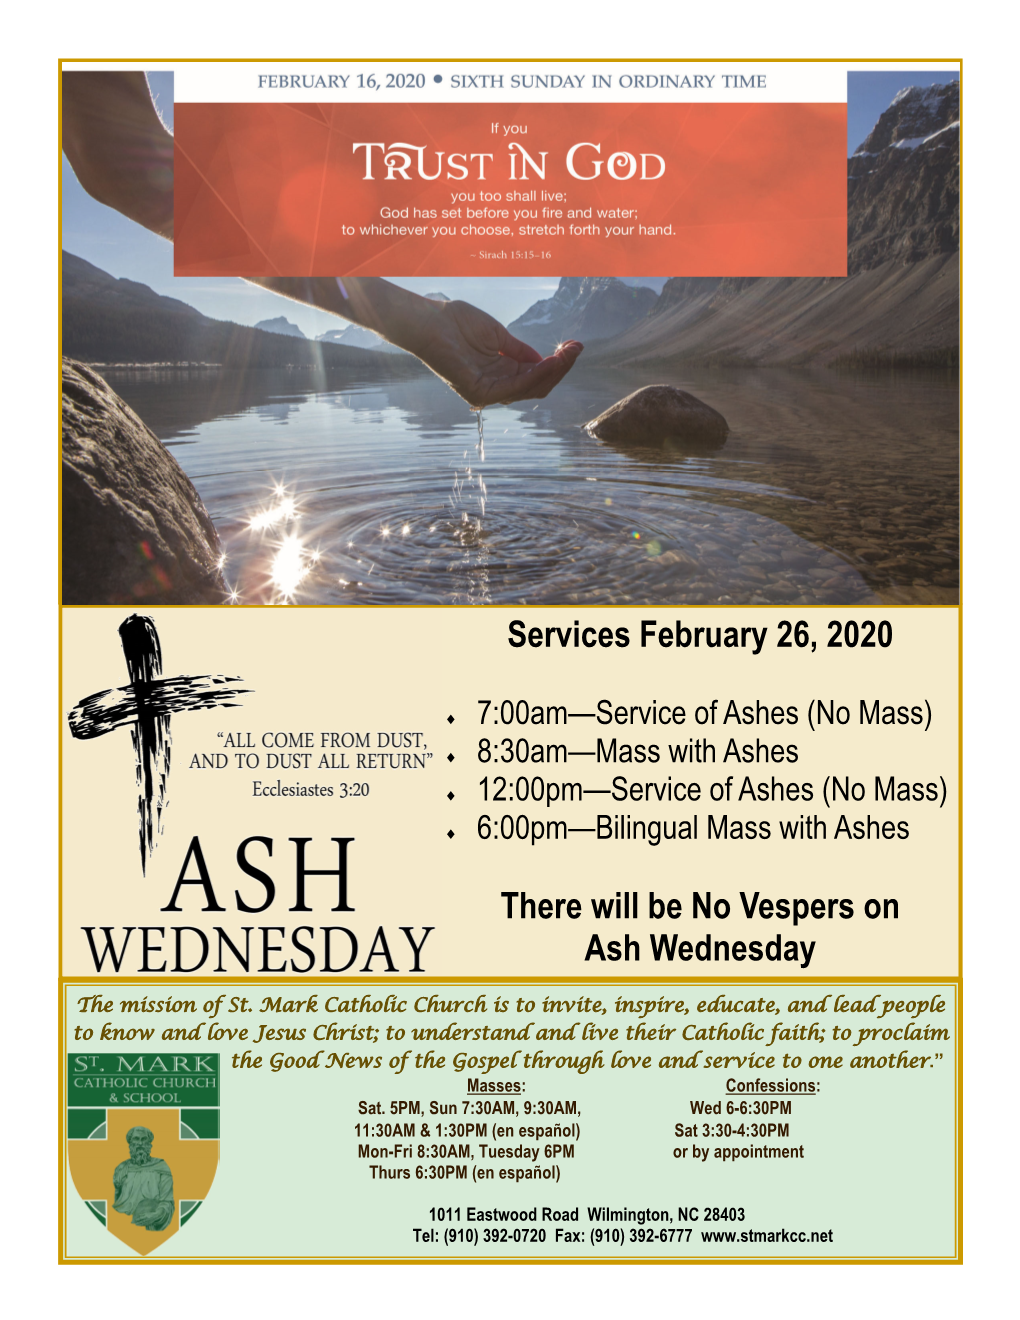 Services February 26, 2020 There Will Be No Vespers on Ash Wednesday